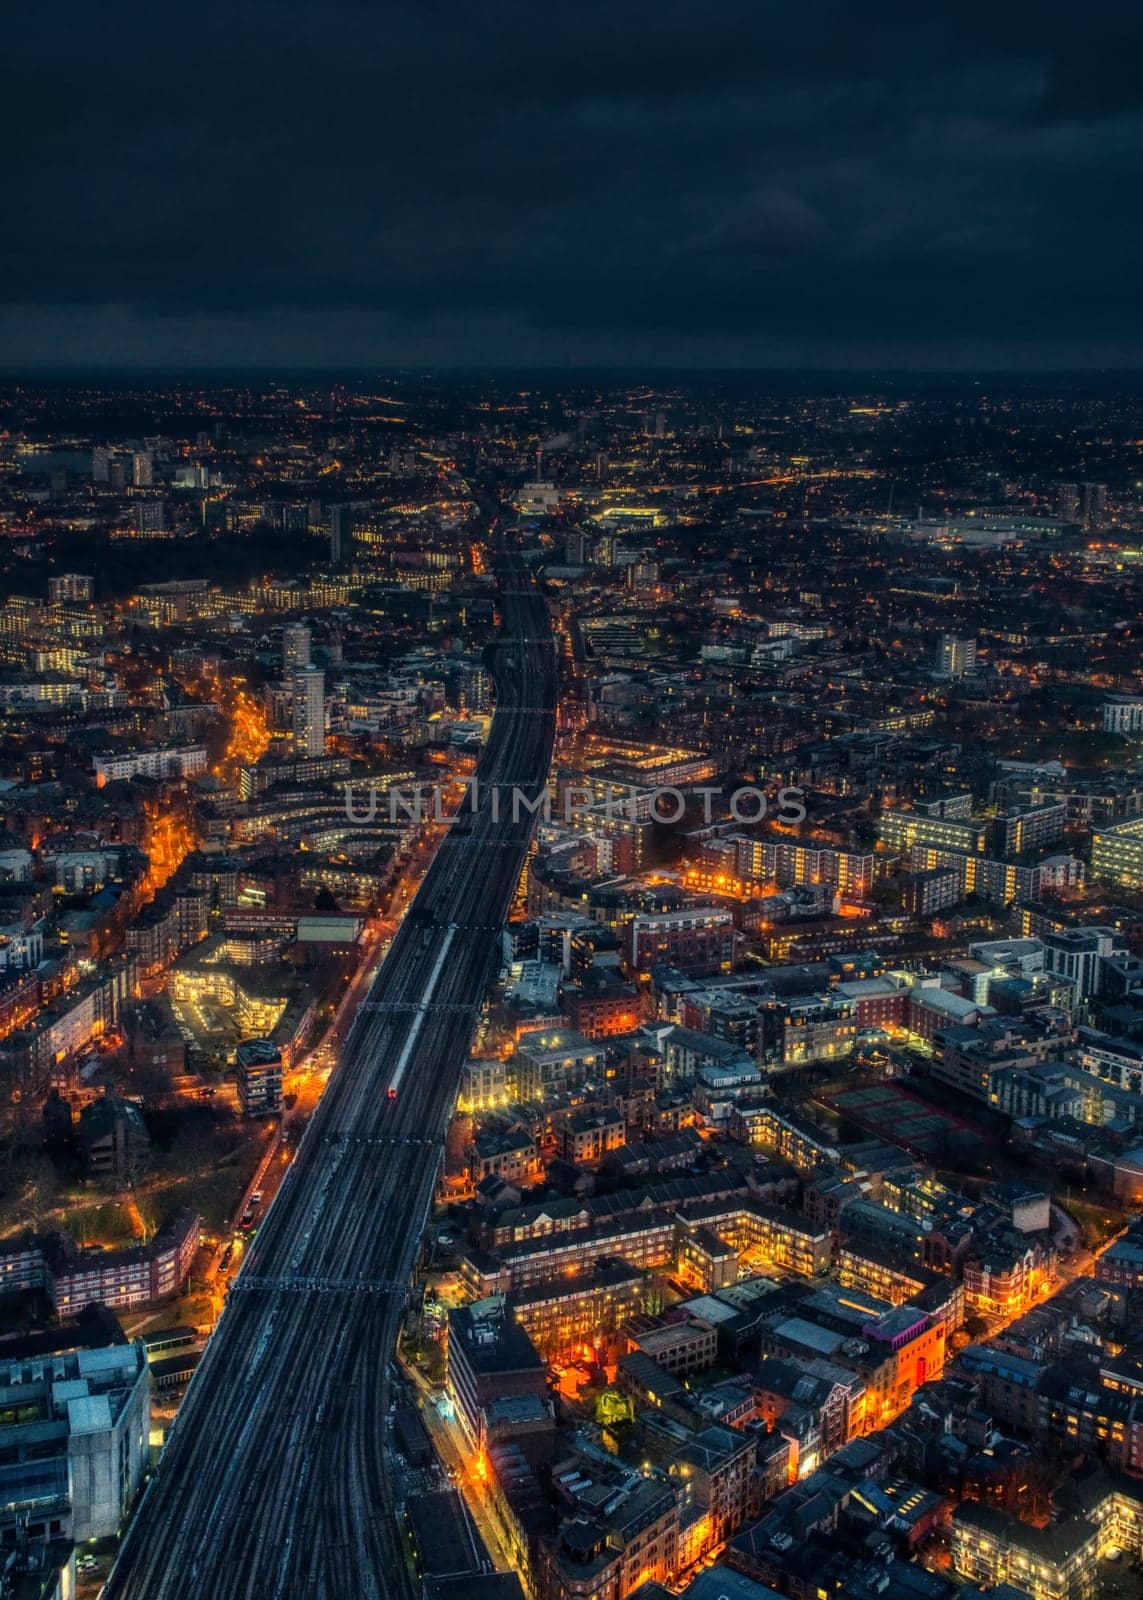 Aerial night view of east London, wide railway track with one train on it in middle by Ivanko